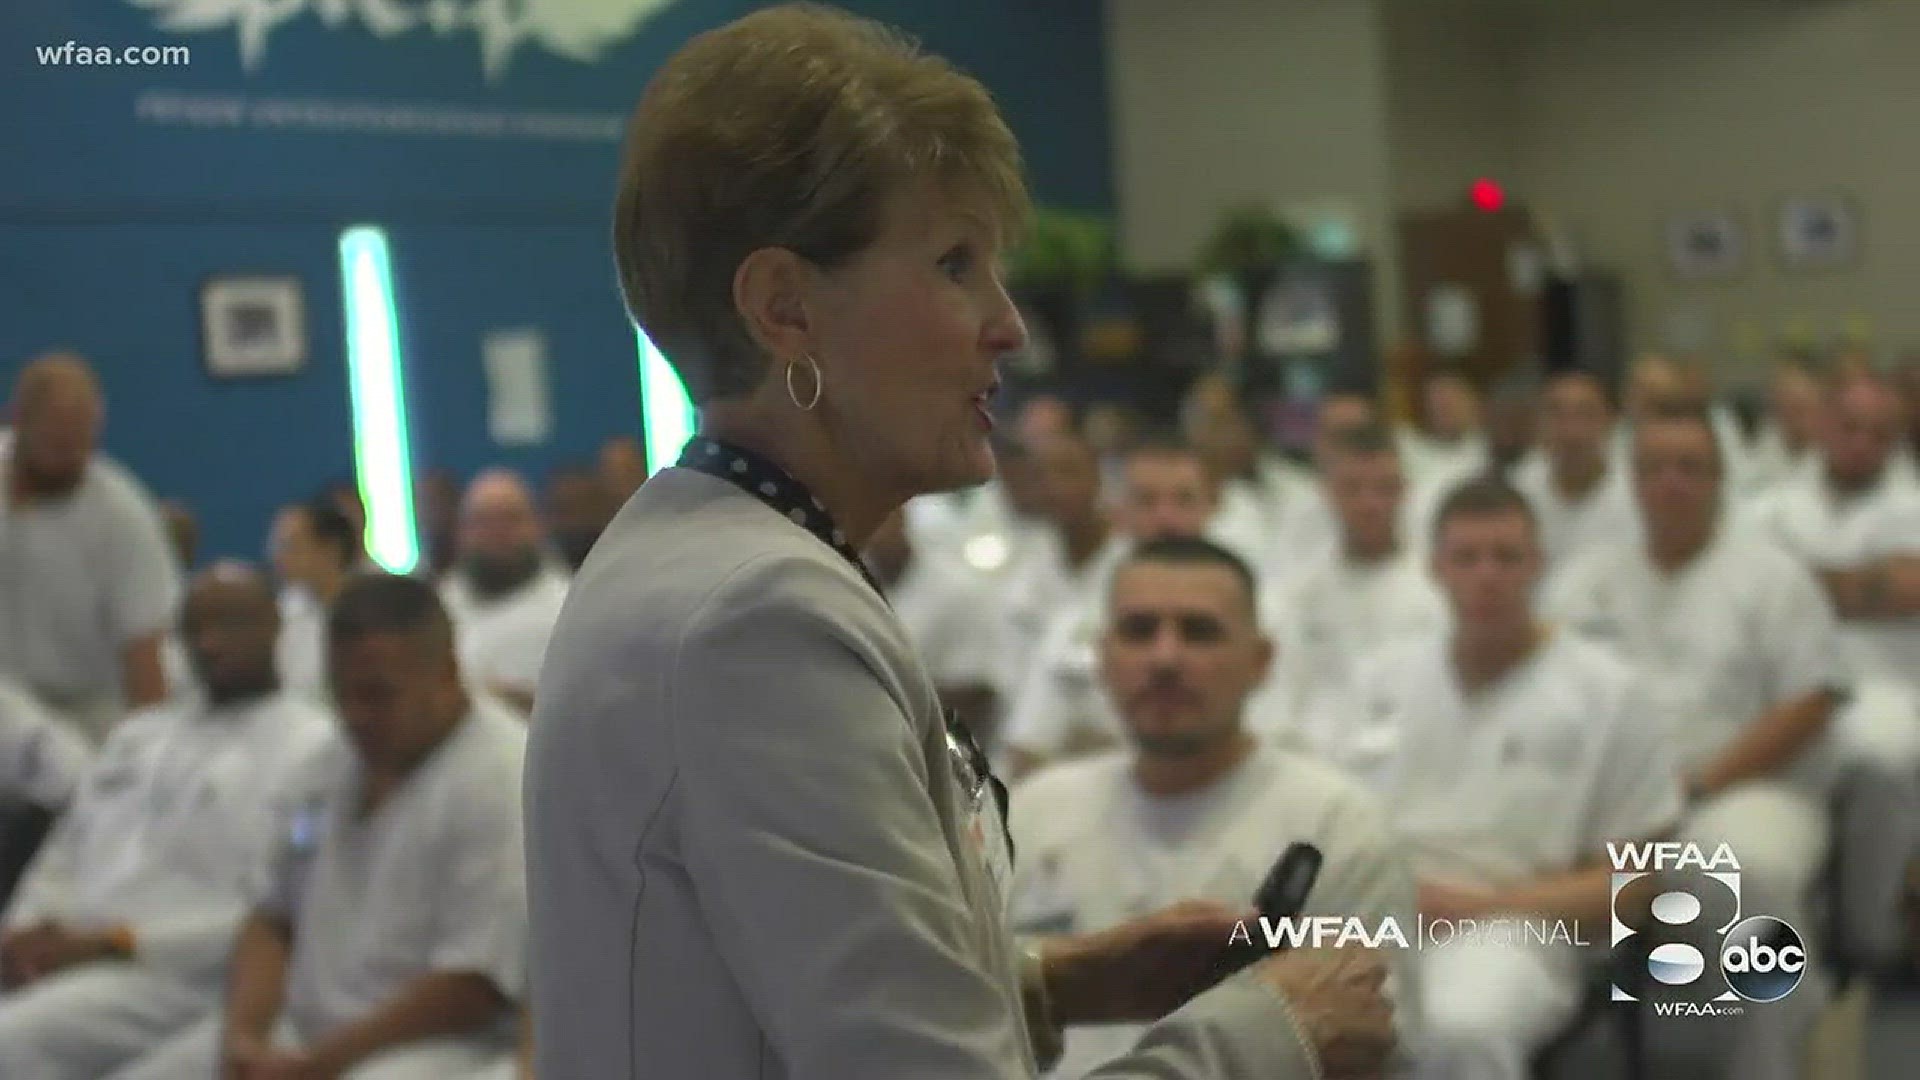 WFAA Original: Woman teaches "manners" to prison inmates